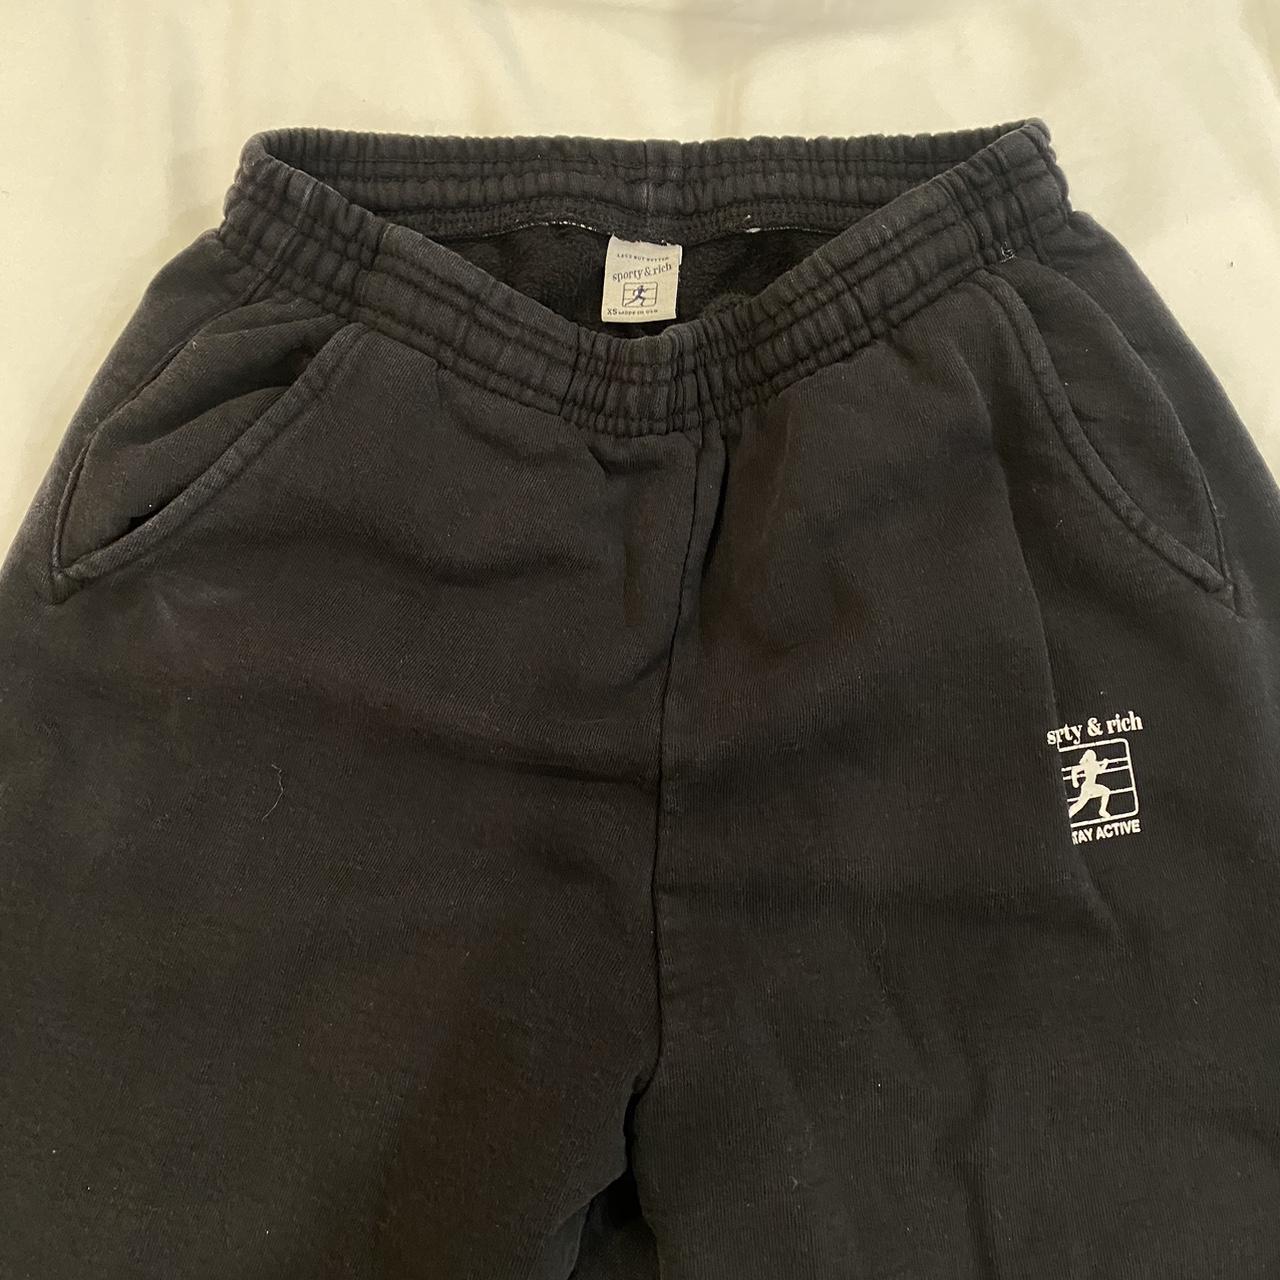 Sporty & rich sweatpants in good condition Size... - Depop